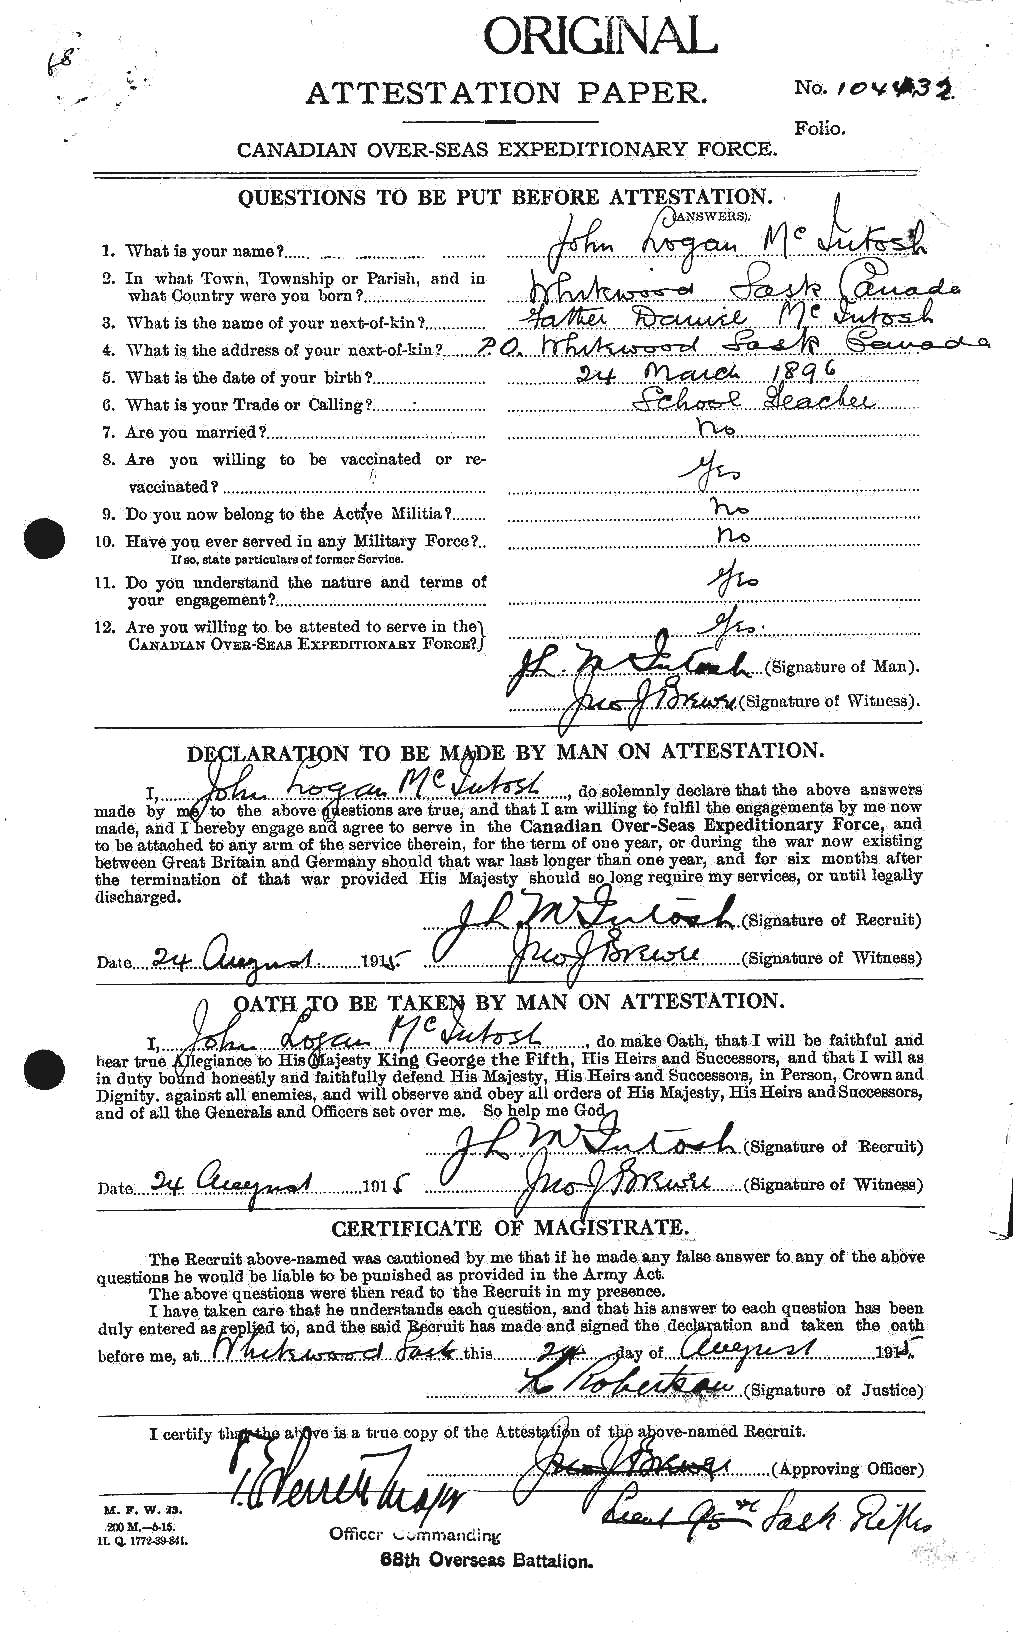 Personnel Records of the First World War - CEF 525645a